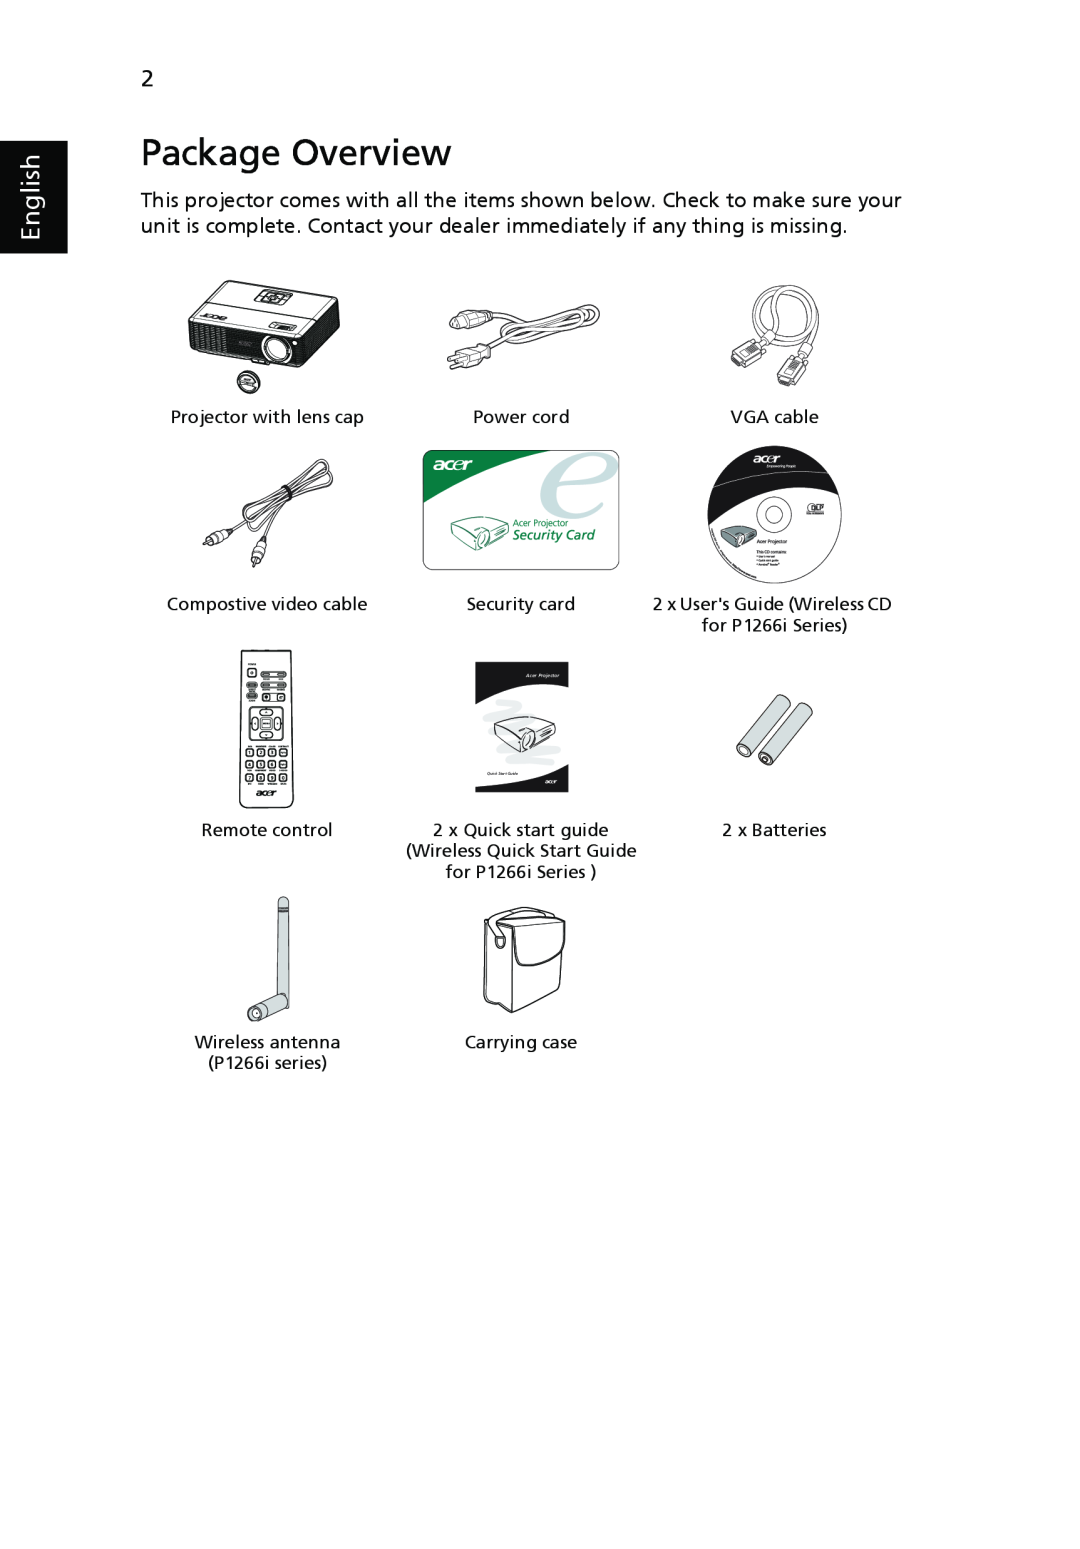 Acer P1266i Package Overview, English, Projector with lens cap, Power cord, VGA cable, Compostive video cable, x Batteries 